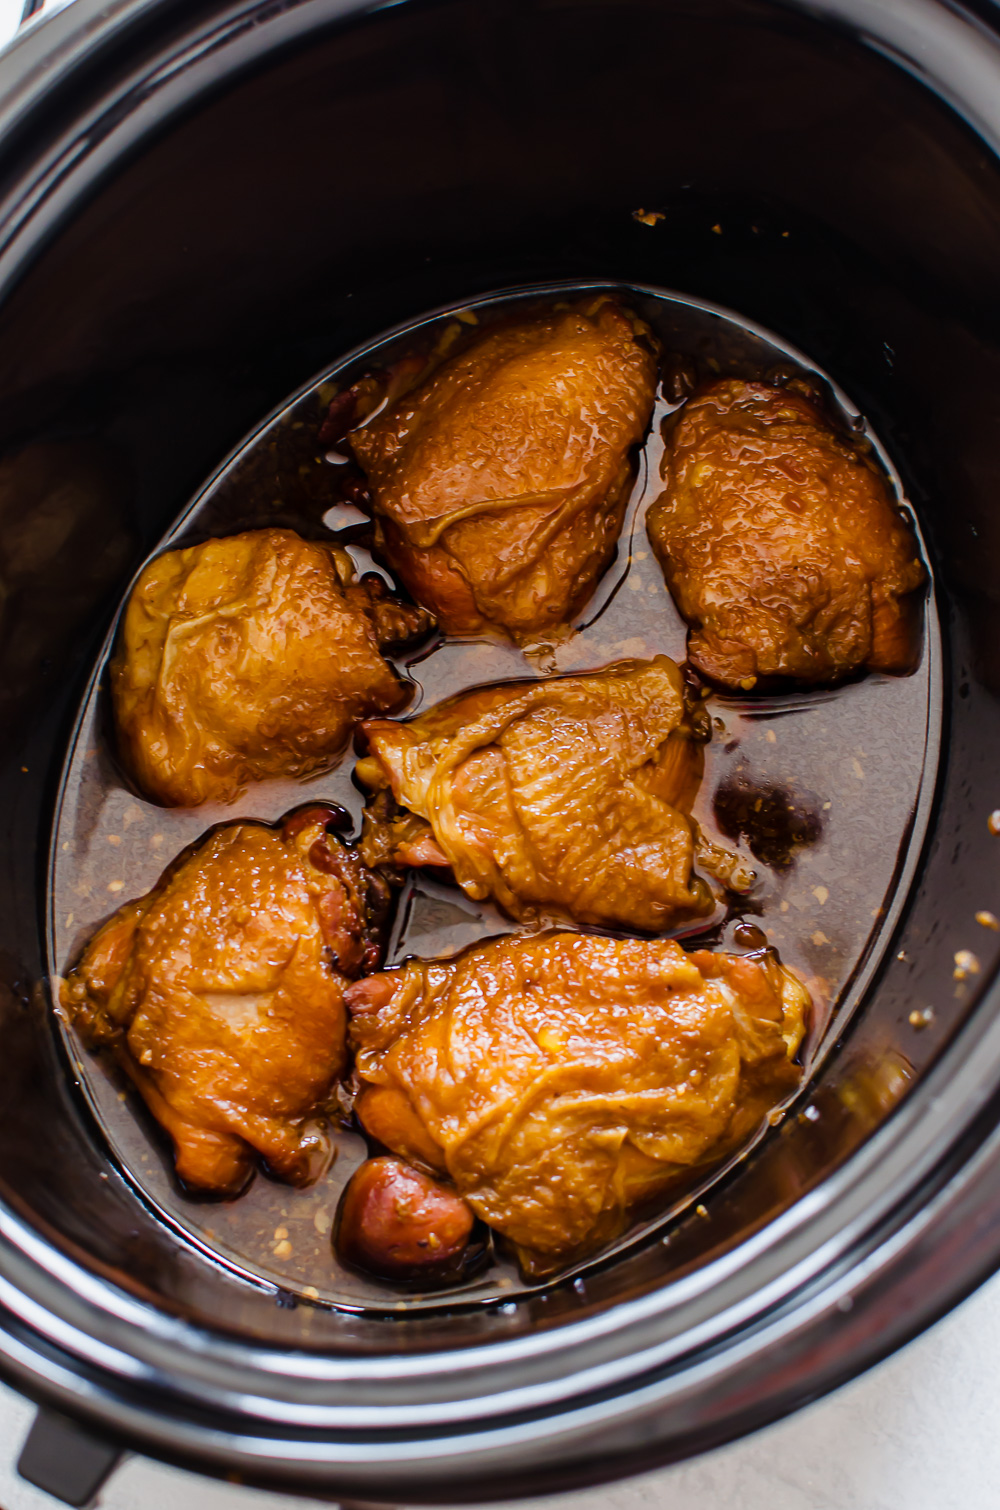 Teriyaki chicken thighs in a slow cooker ready to be served.